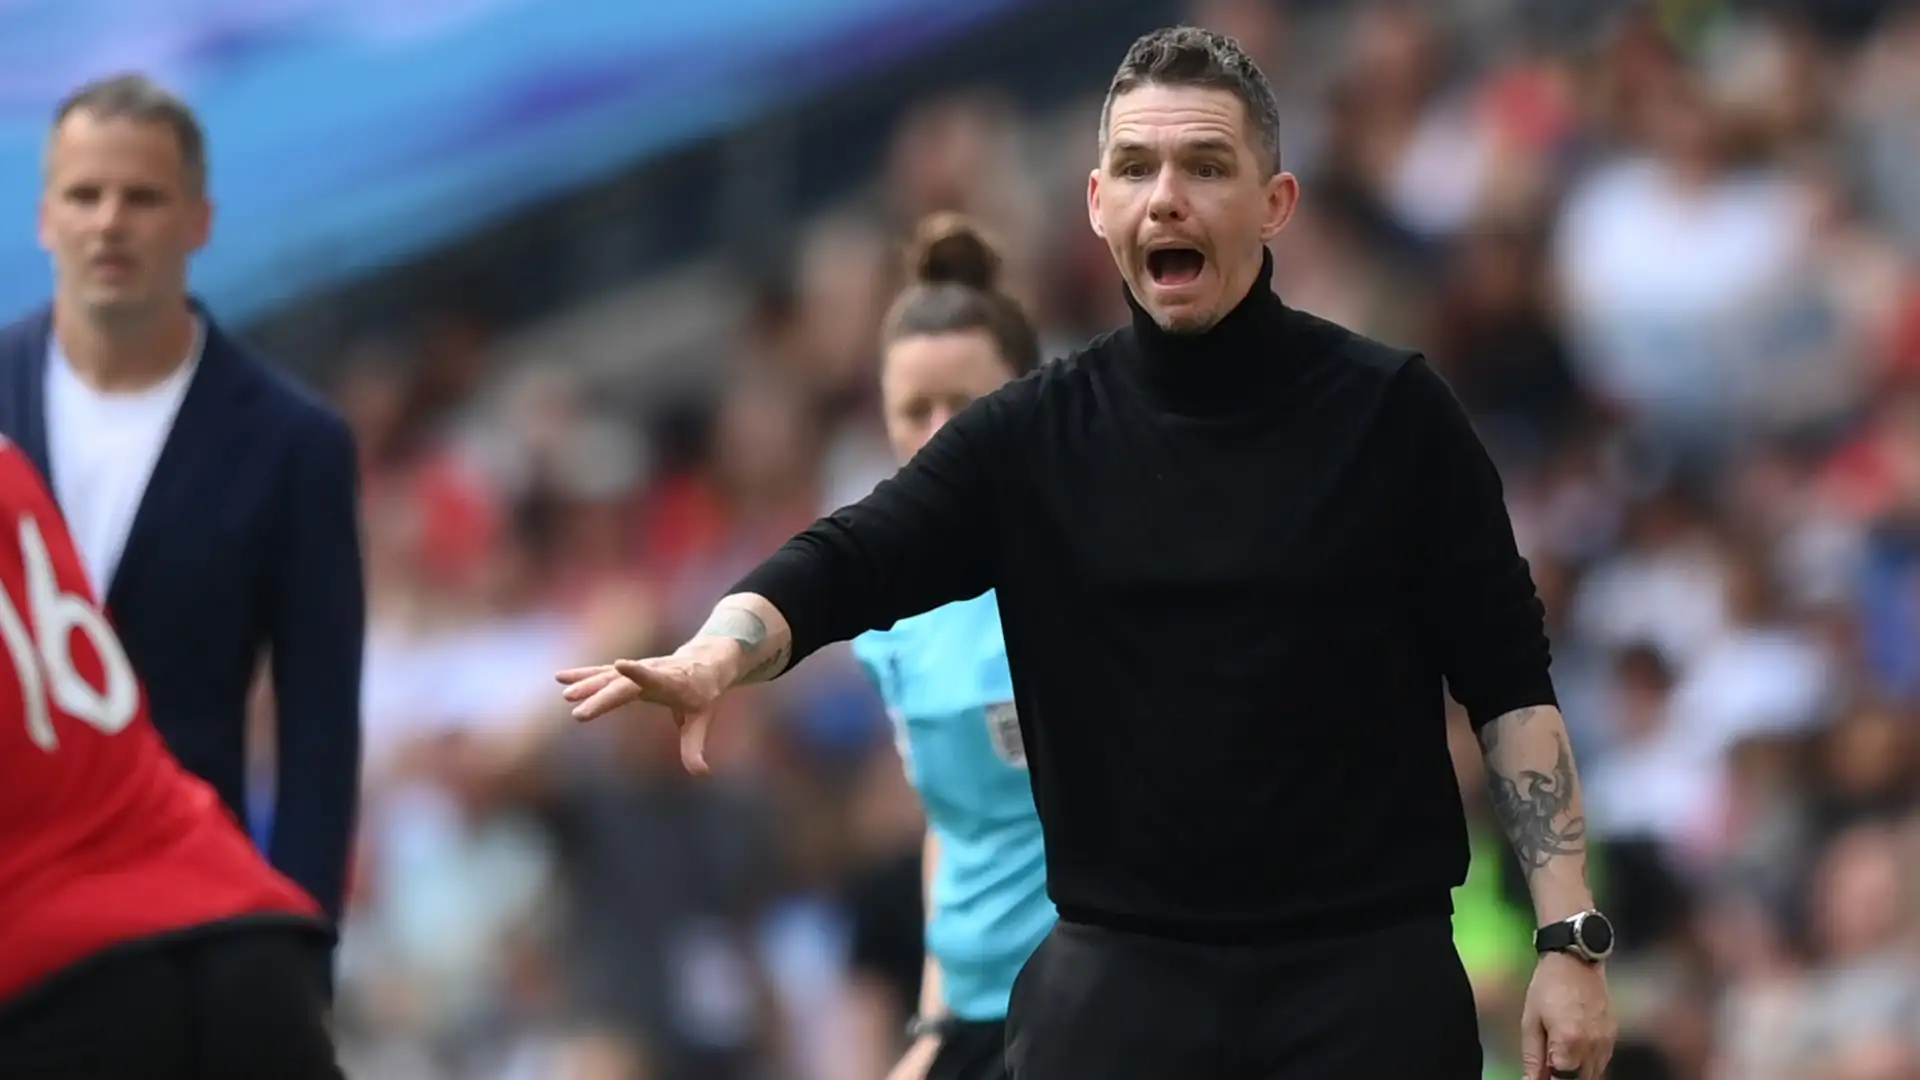 Man Utd Women's boss Marc Skinner speaks out after club cancel end-of-season awards dinner as men's team prepare for FA Cup final